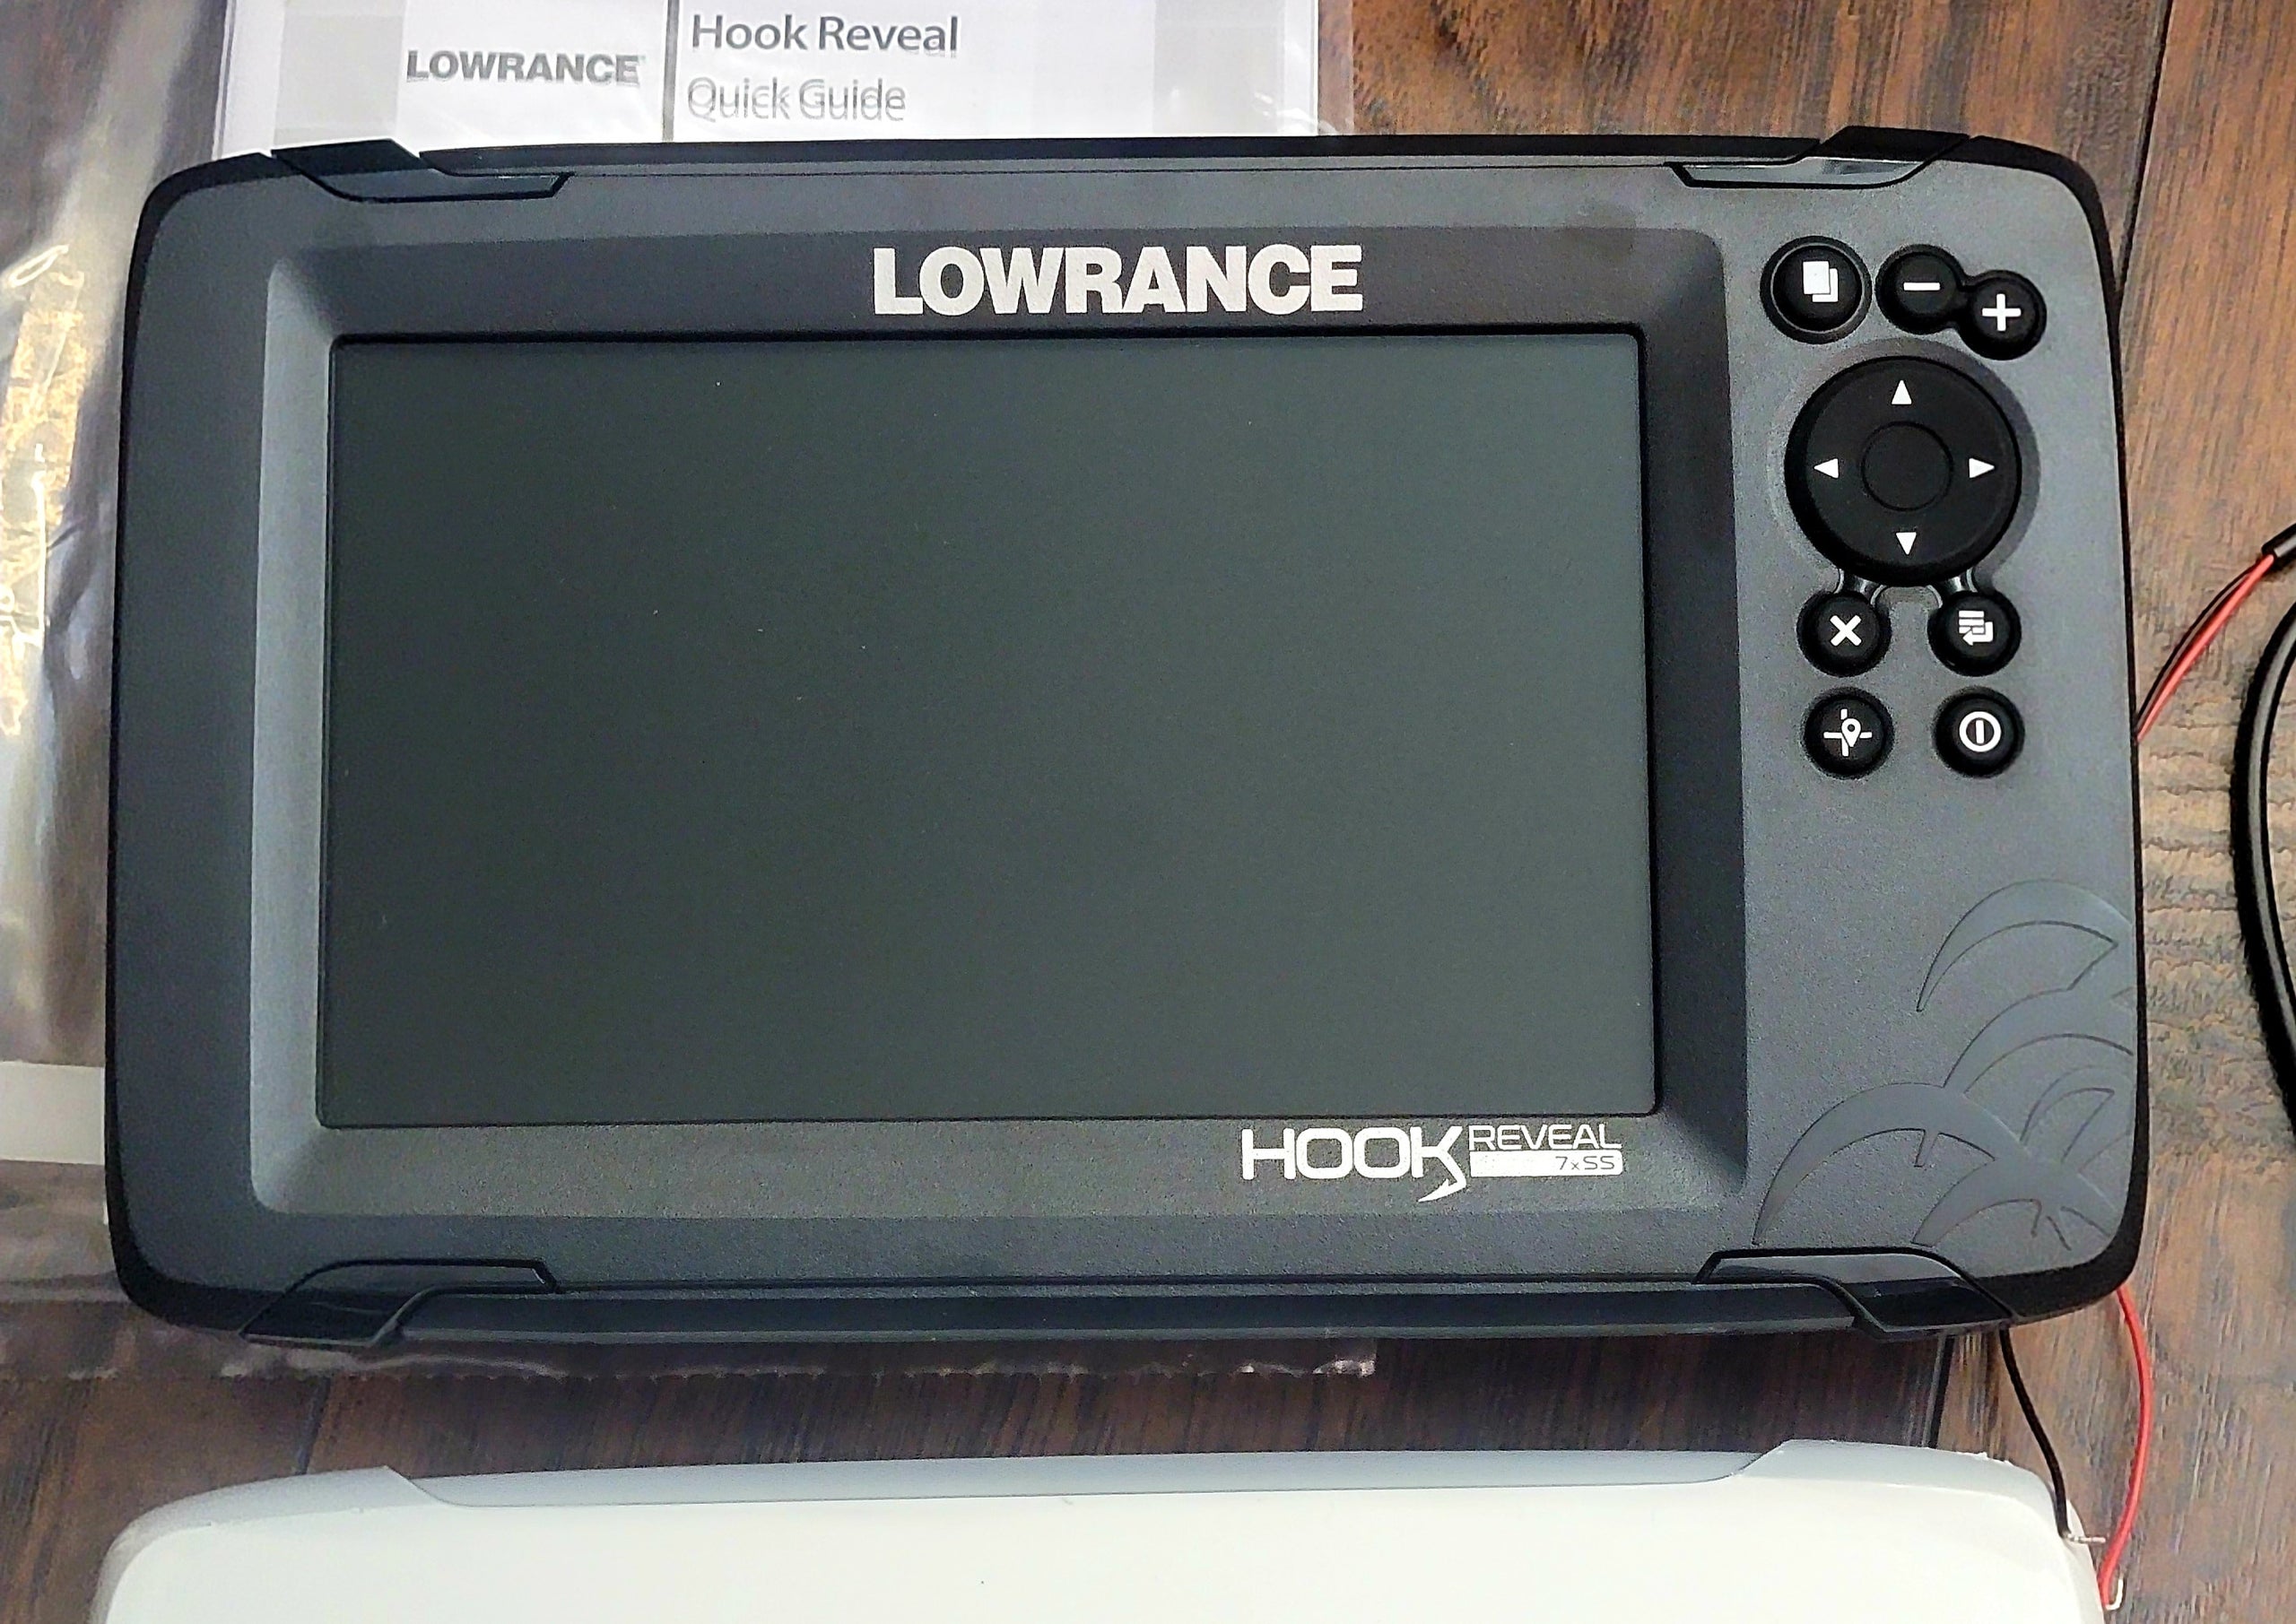 Lowrance Hook Reveal 7x with SplitShot / High Chirp Transducer + Extras  (New - Open Box)